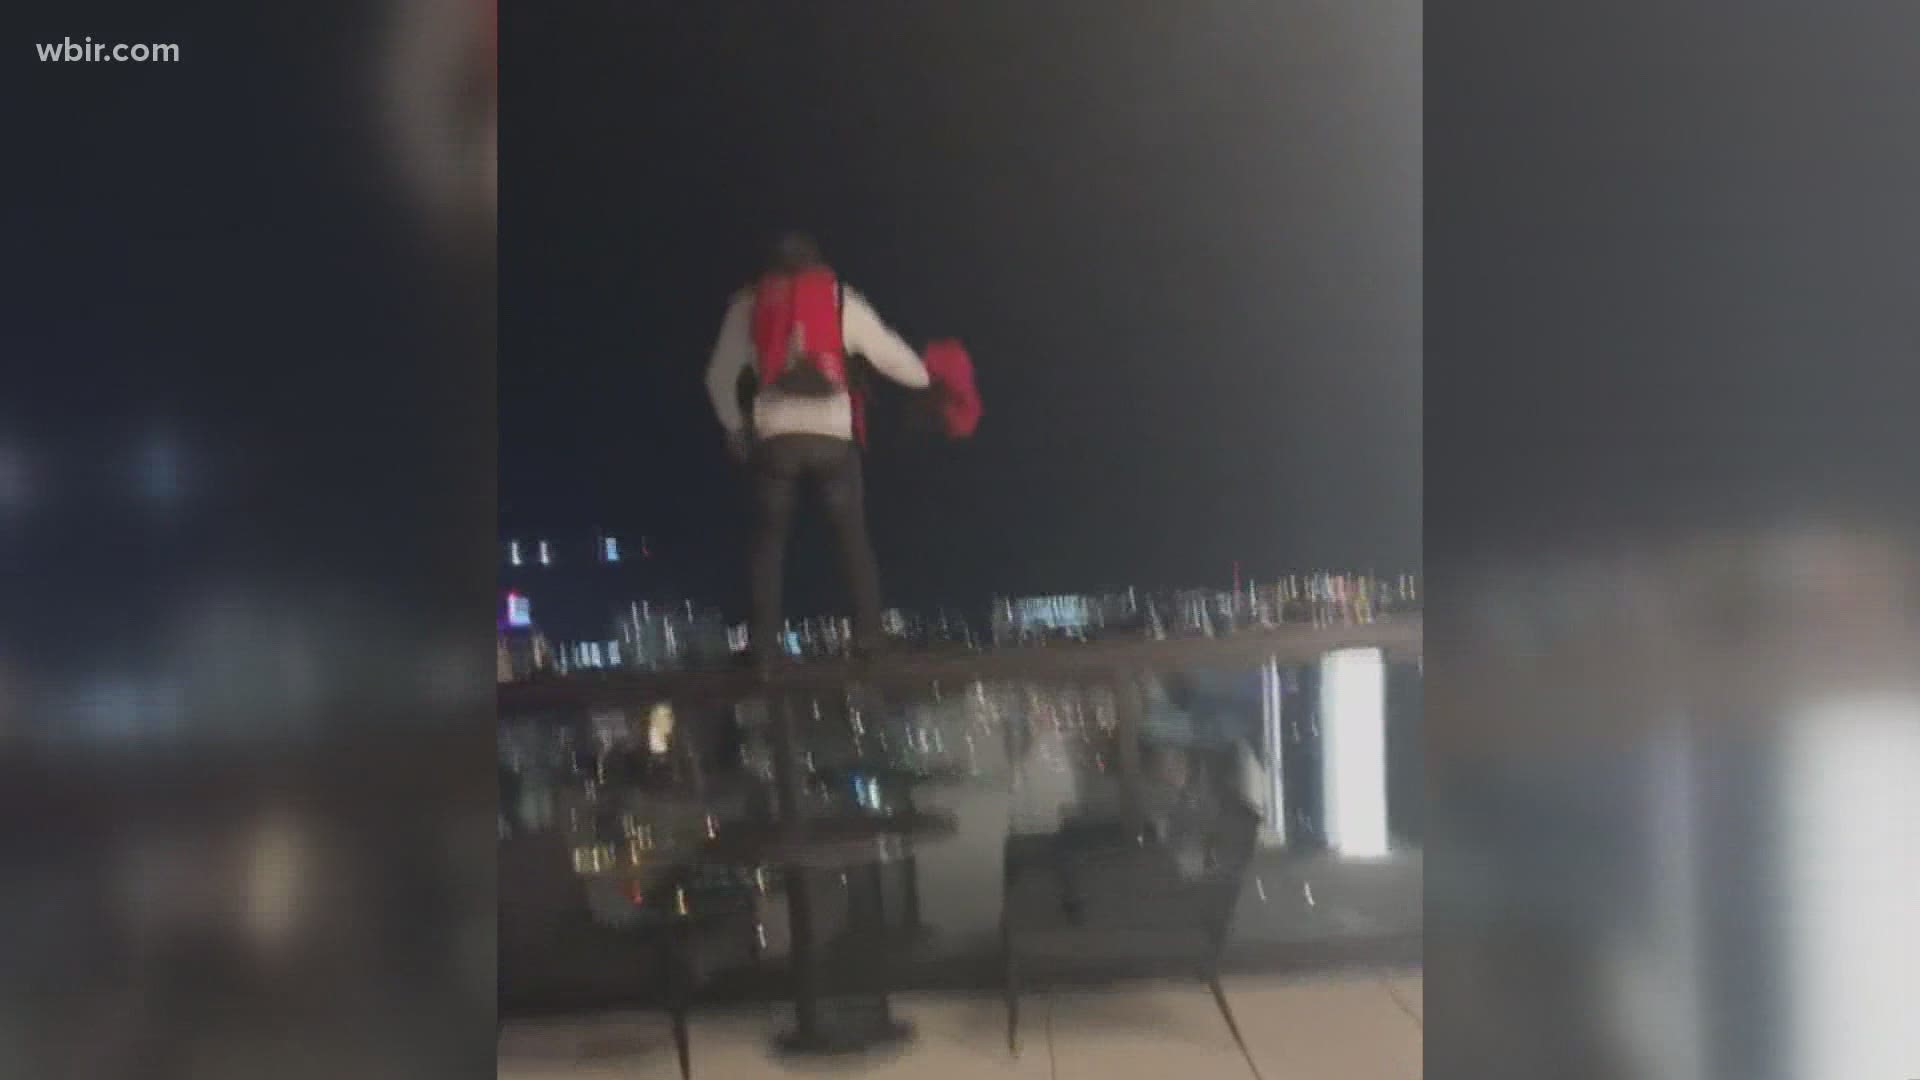 Nashville police are looking for two people who base-jumped off the roof of a hotel.